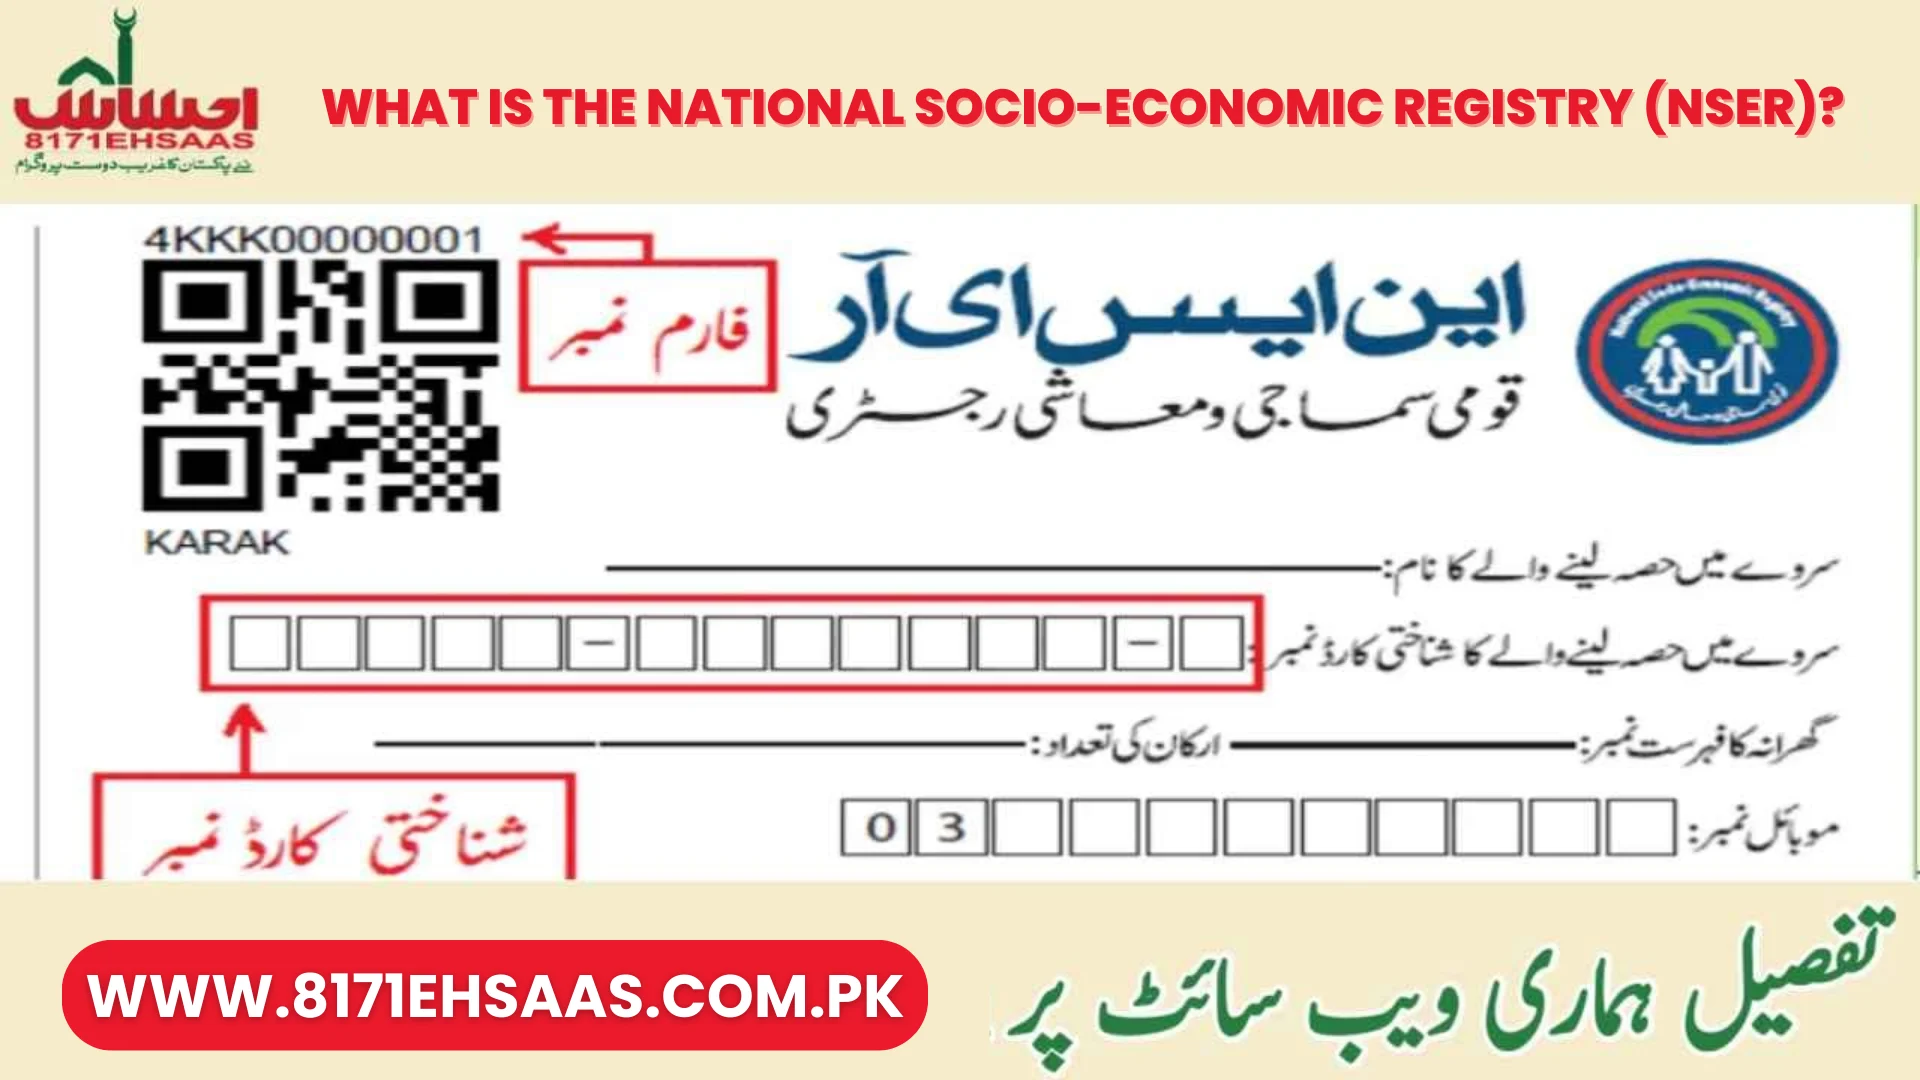 What is the National Socio-economic Registry (NSER)